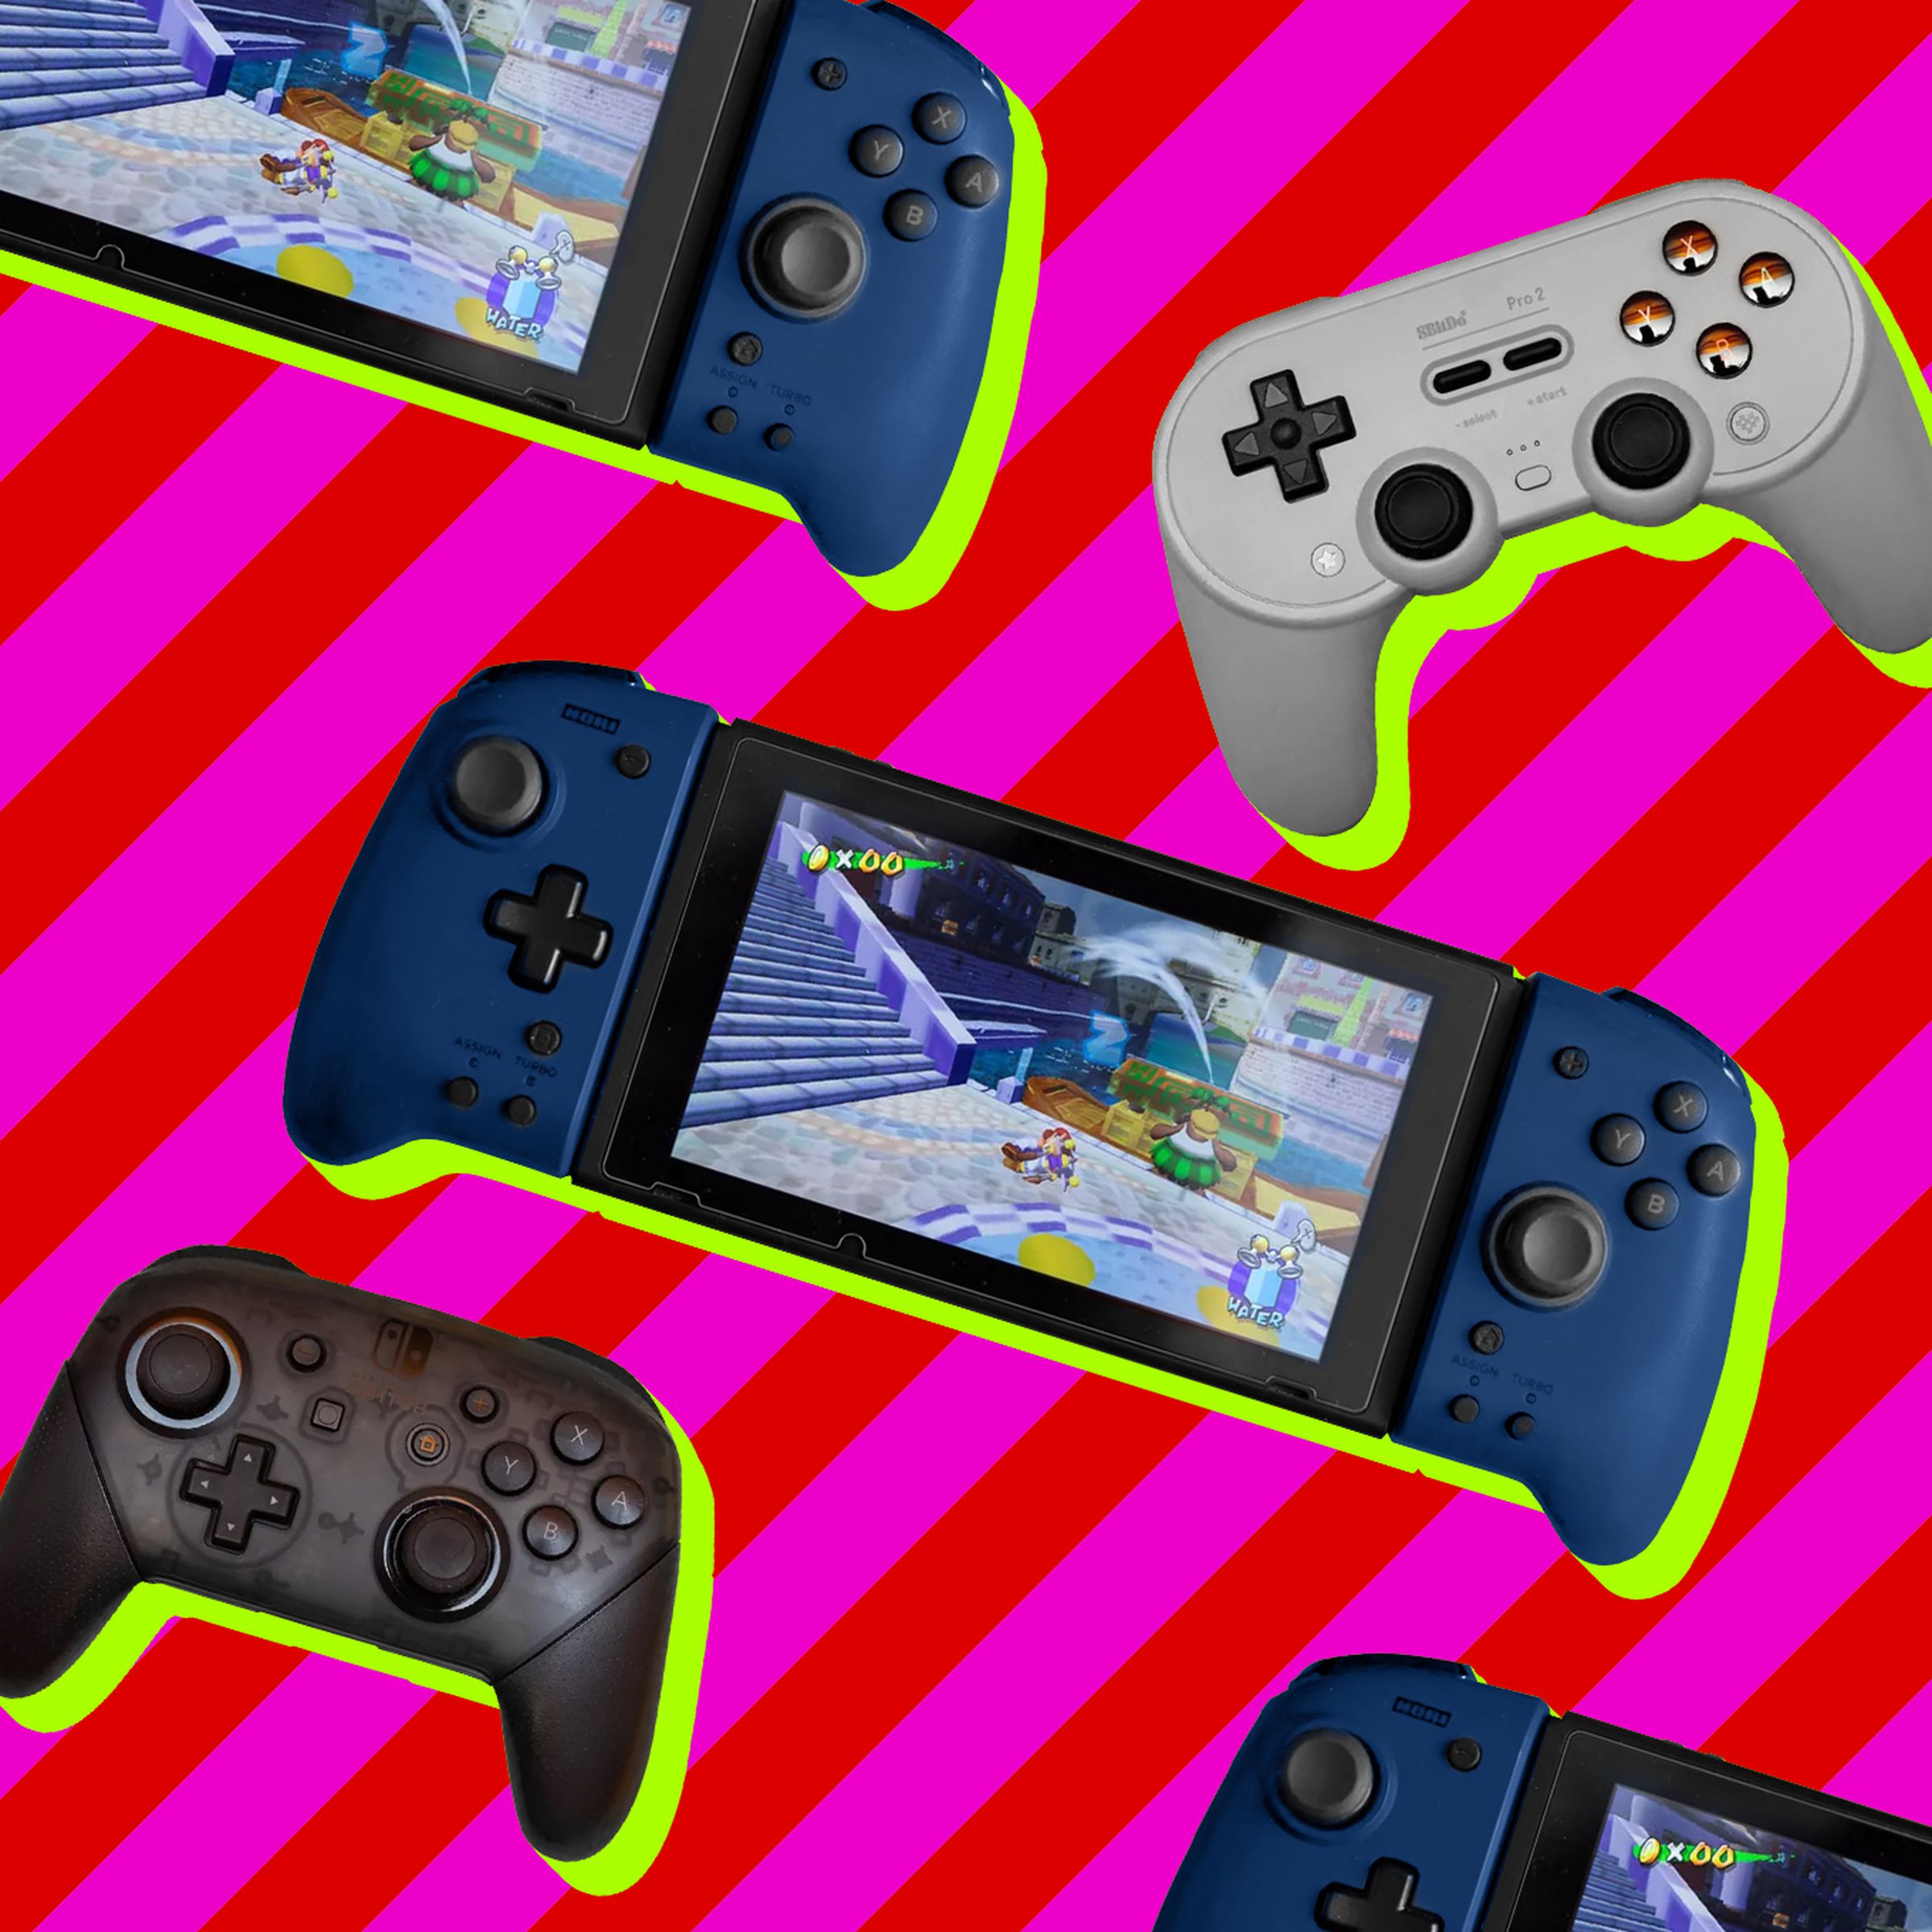 Photocollage of a variety of Nintendo Switch controllers.